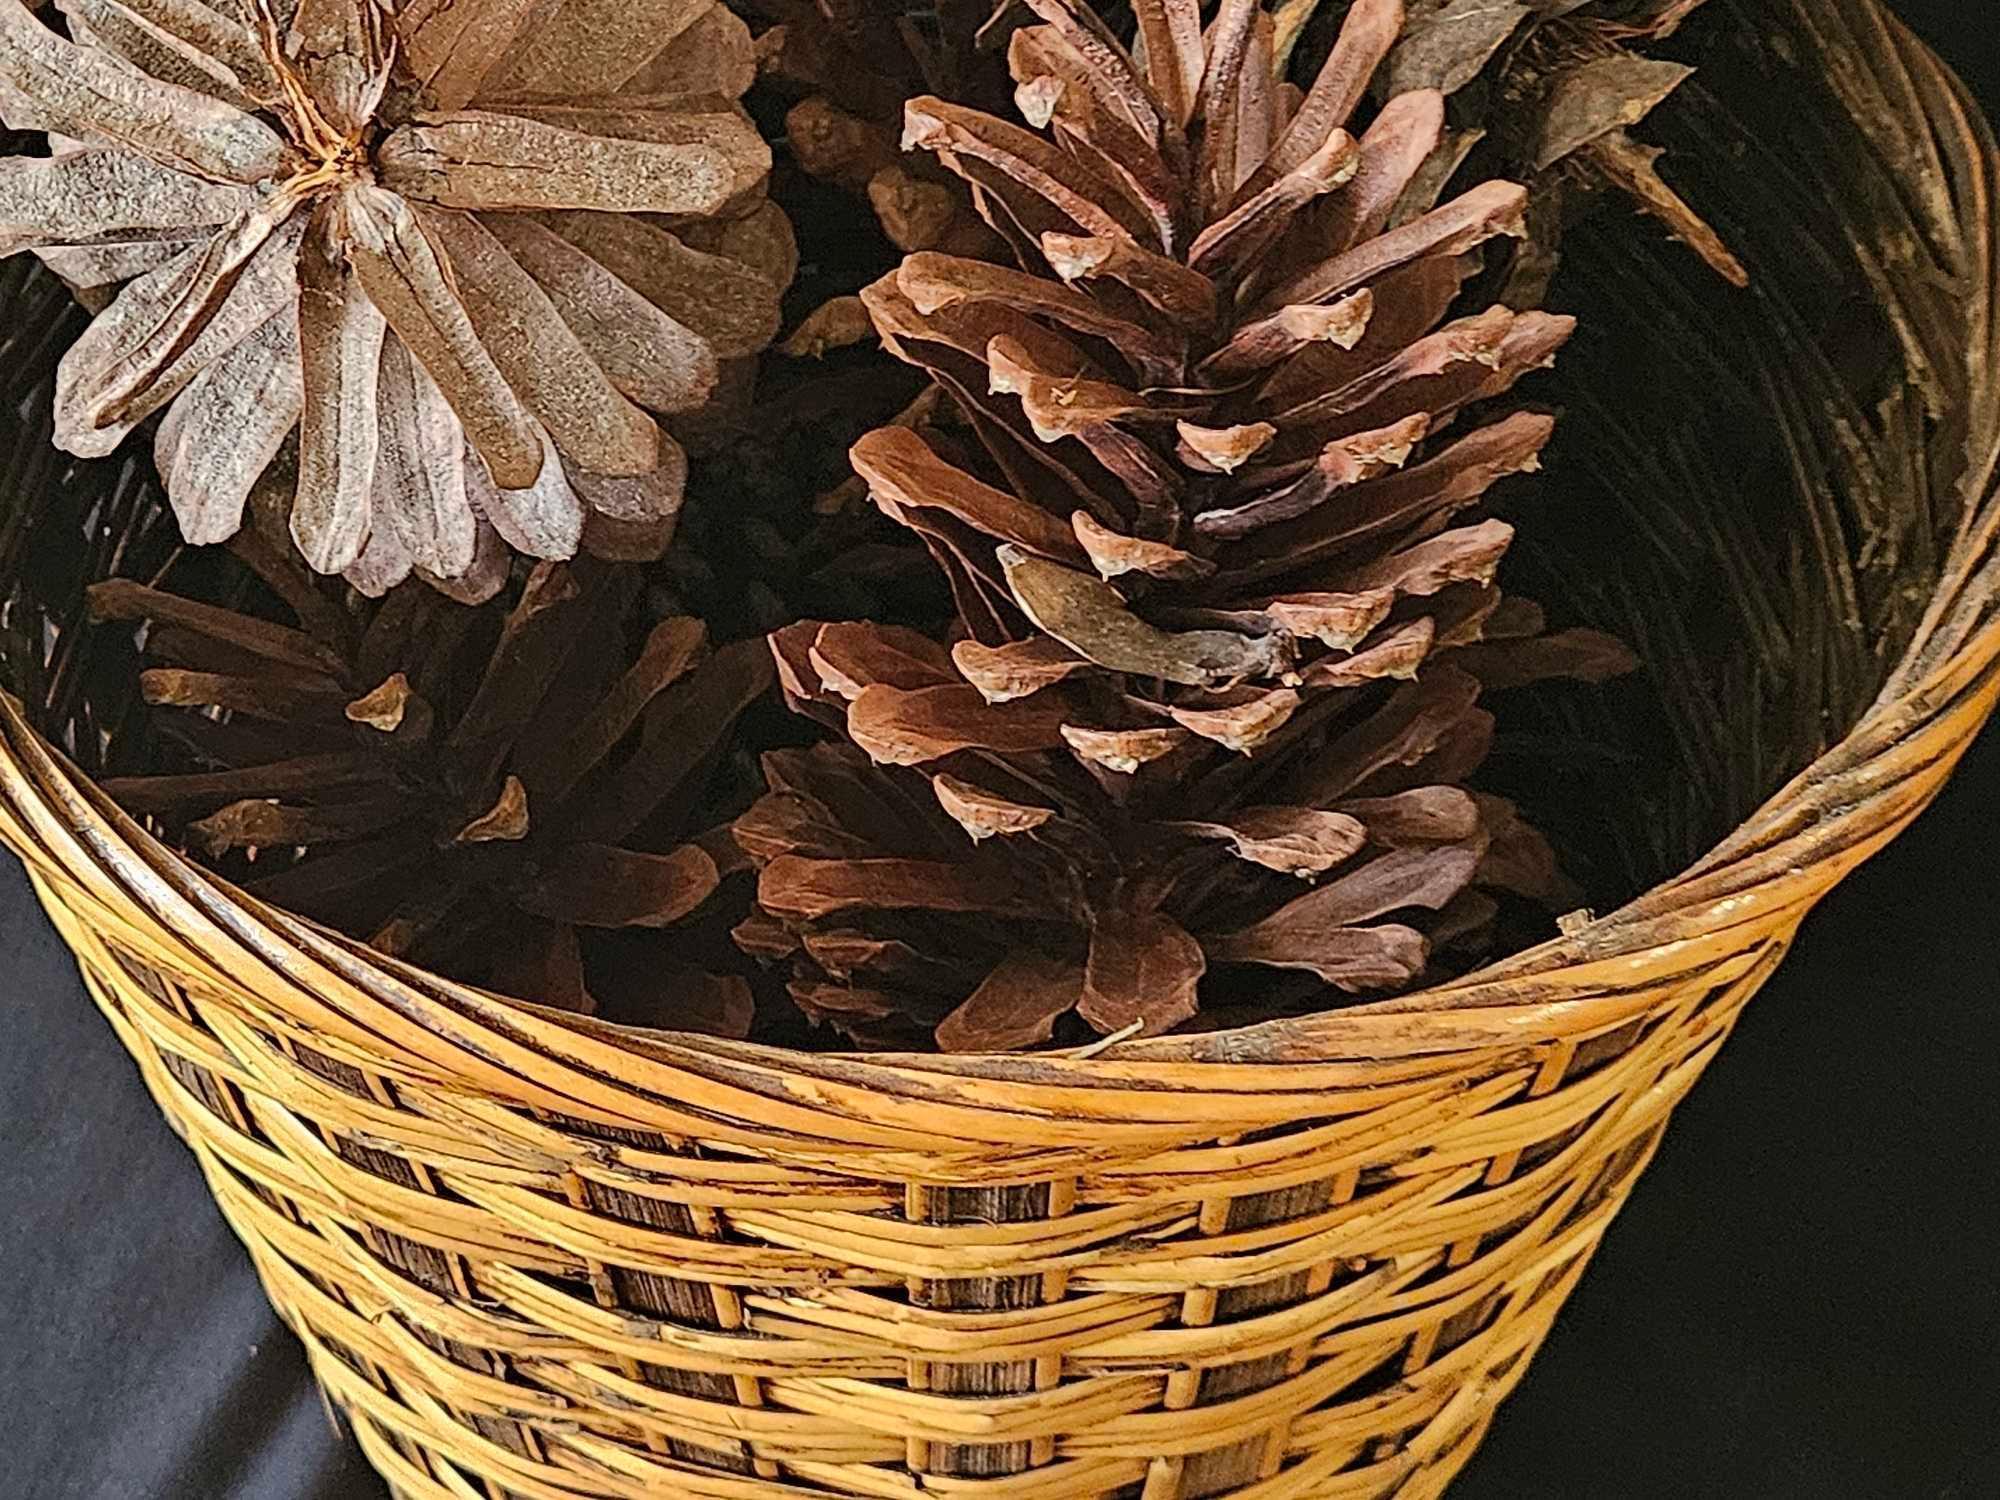 LARGE VINTAGE WOVEN BASKET WITH CURIOUSLY LARGE PINECONES